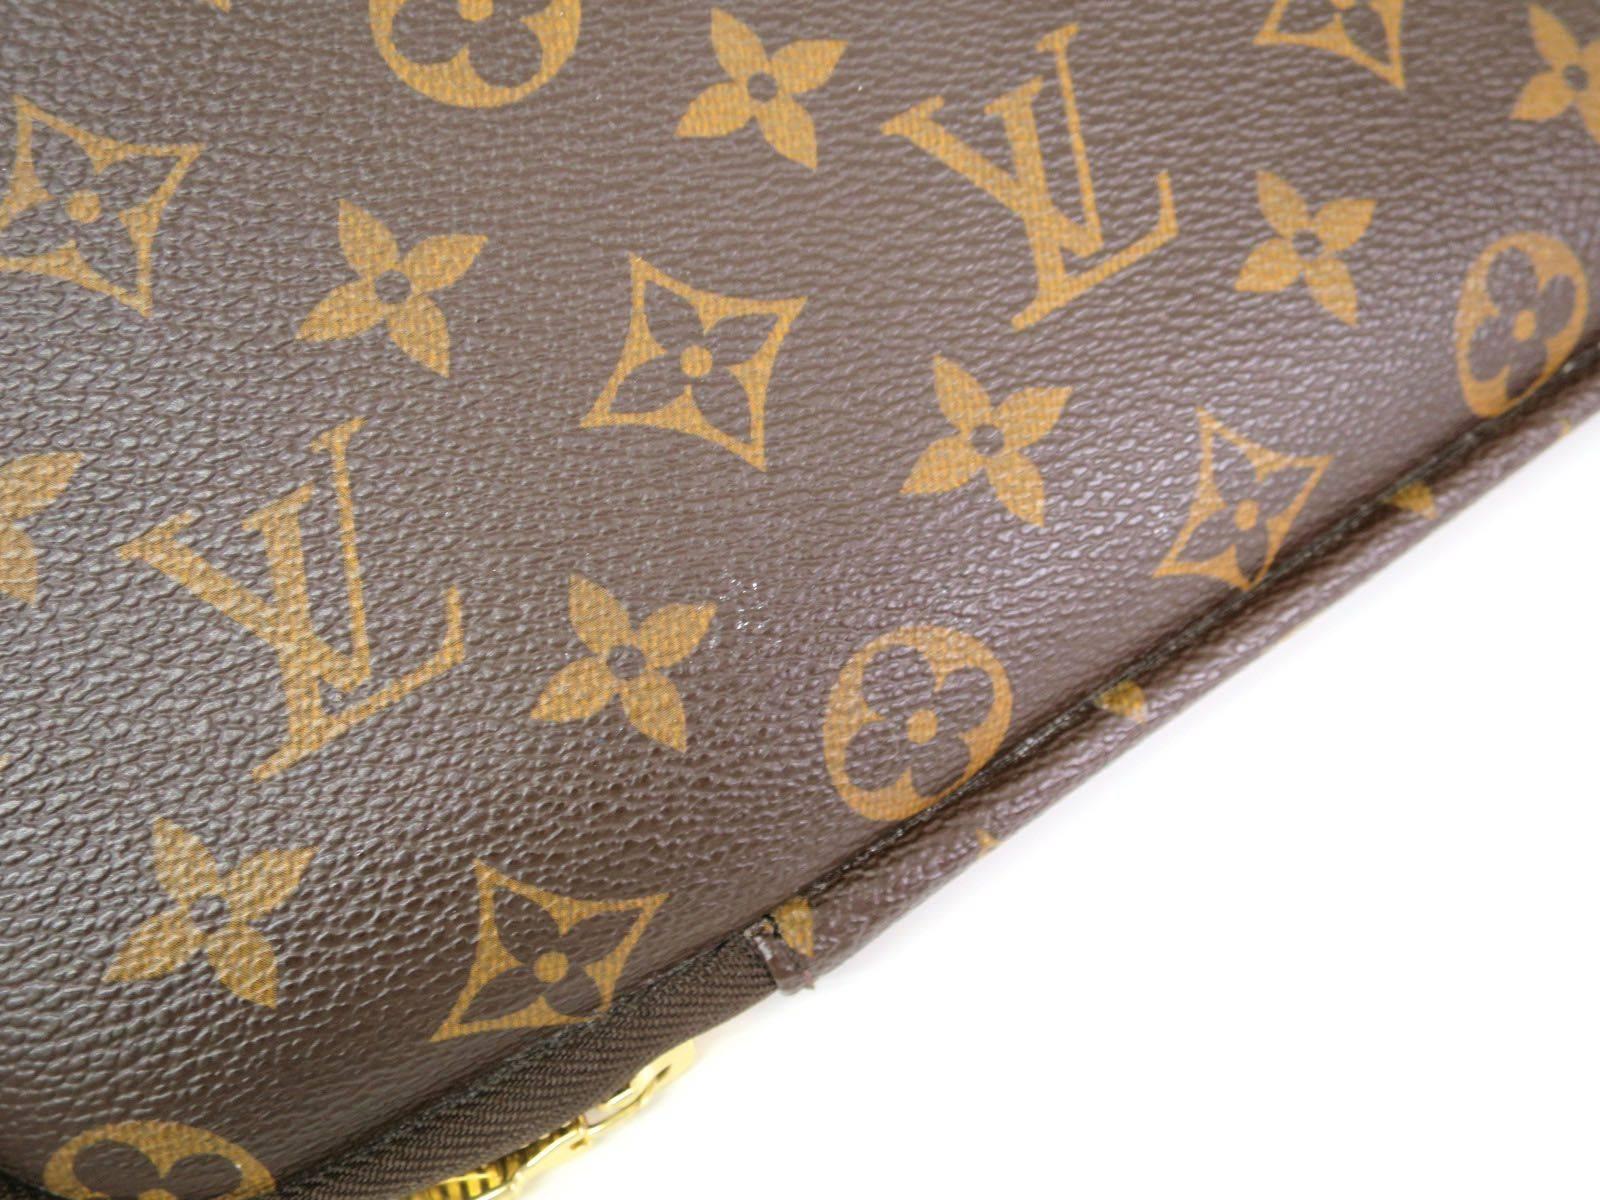 CURATOR'S NOTES

When a flimsy, foam carrying case just won't do, opt for a sleek and stylish Louis Vuitton monogram canvas tech accessory instead.

Monogram canvas
Gold tone hardware
Zipper closure
Made in France
Date Code VI4088
Measures